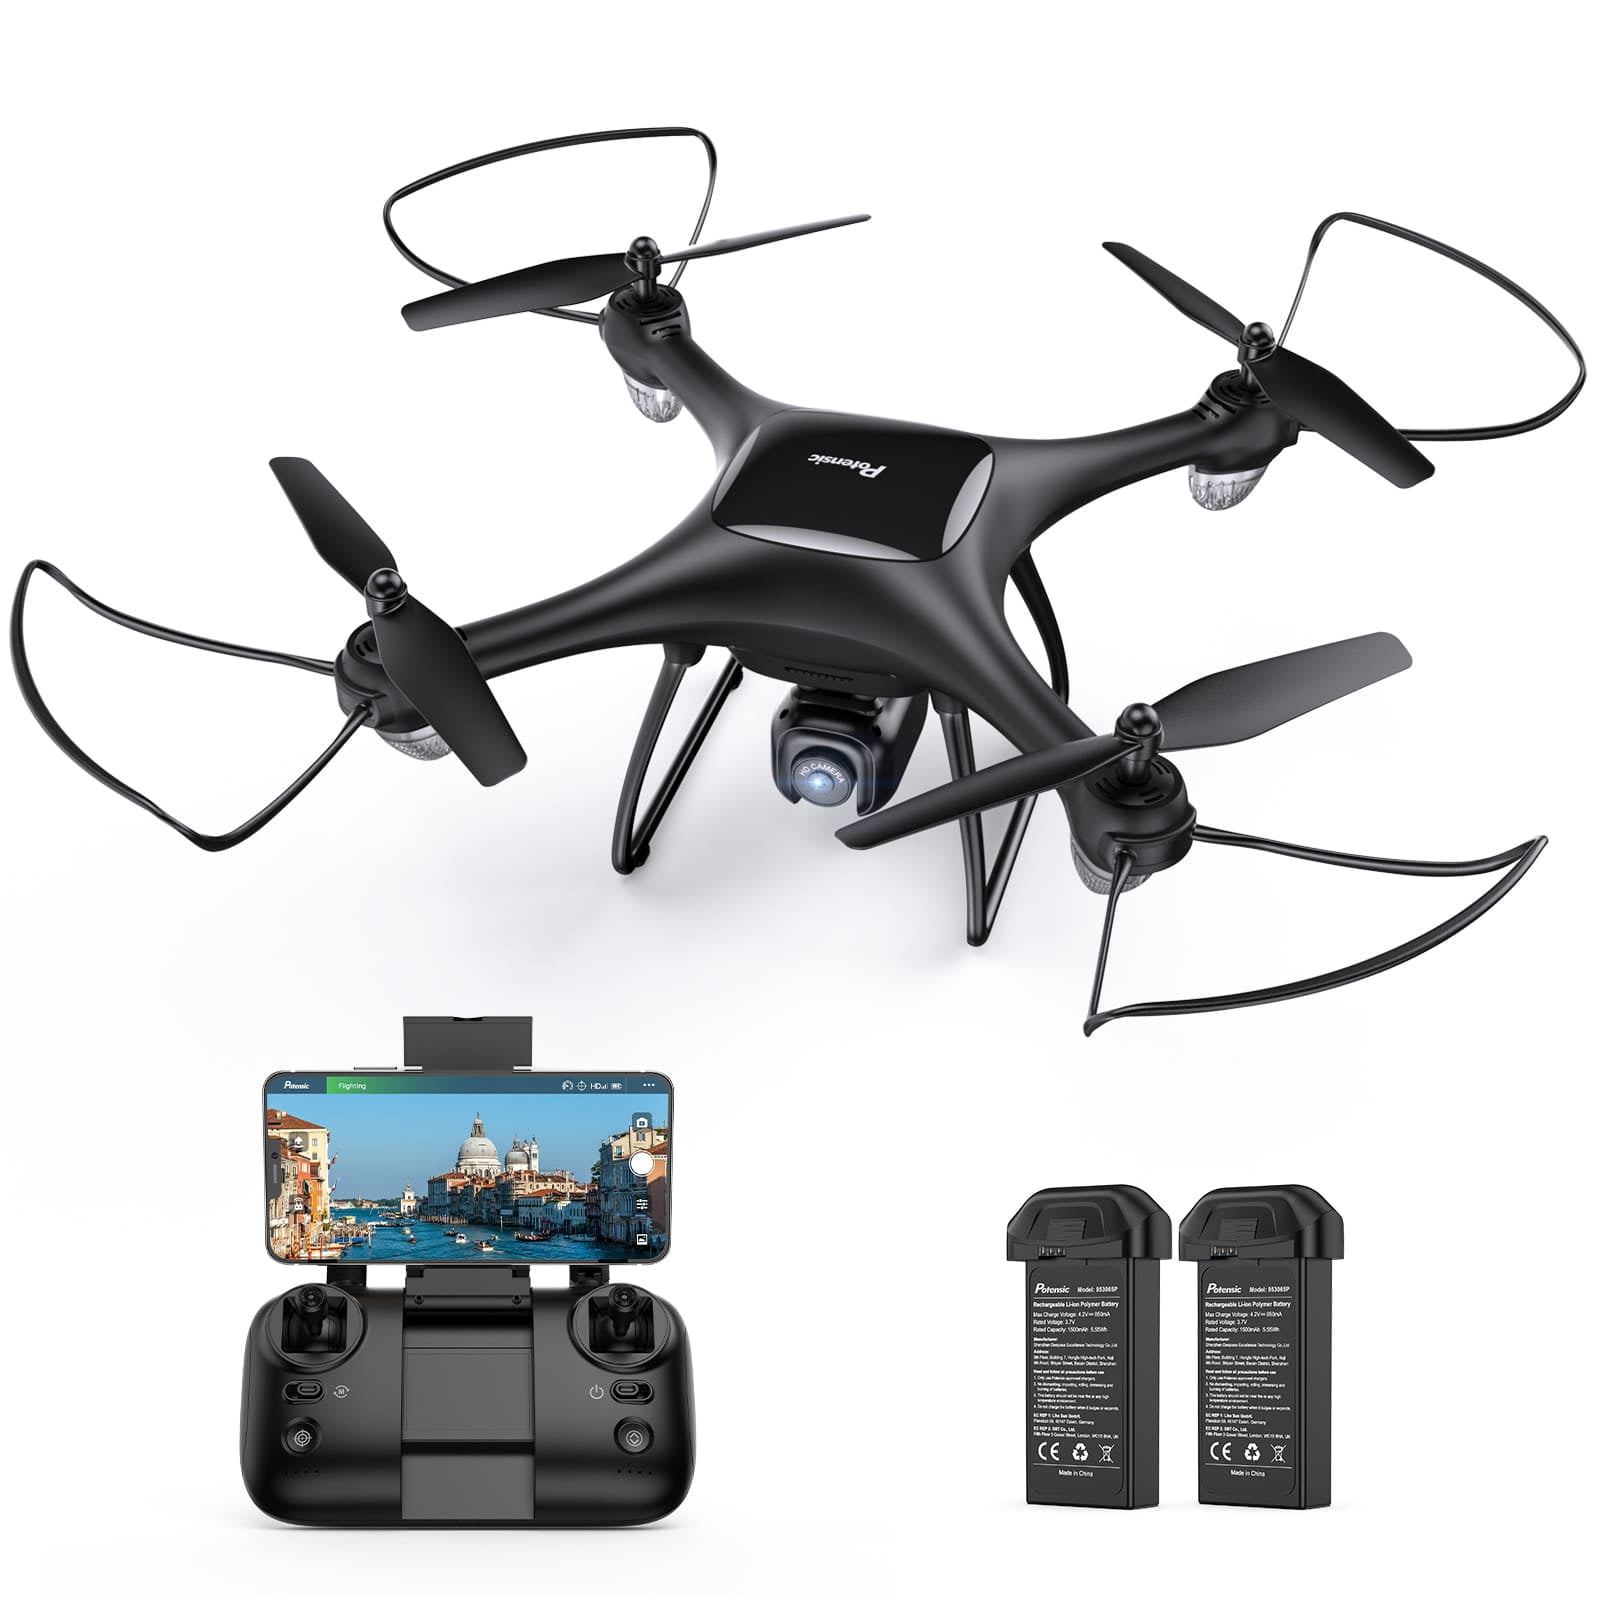 Follow Me Altitude Hold Auto Return Home Circle Fly Headless Mode 5G WiFi GPS FPV Quadcopter for Adults and Beginners 40 Mins Long Flight Potensic P5 Drones with Camera for Adults 4K 